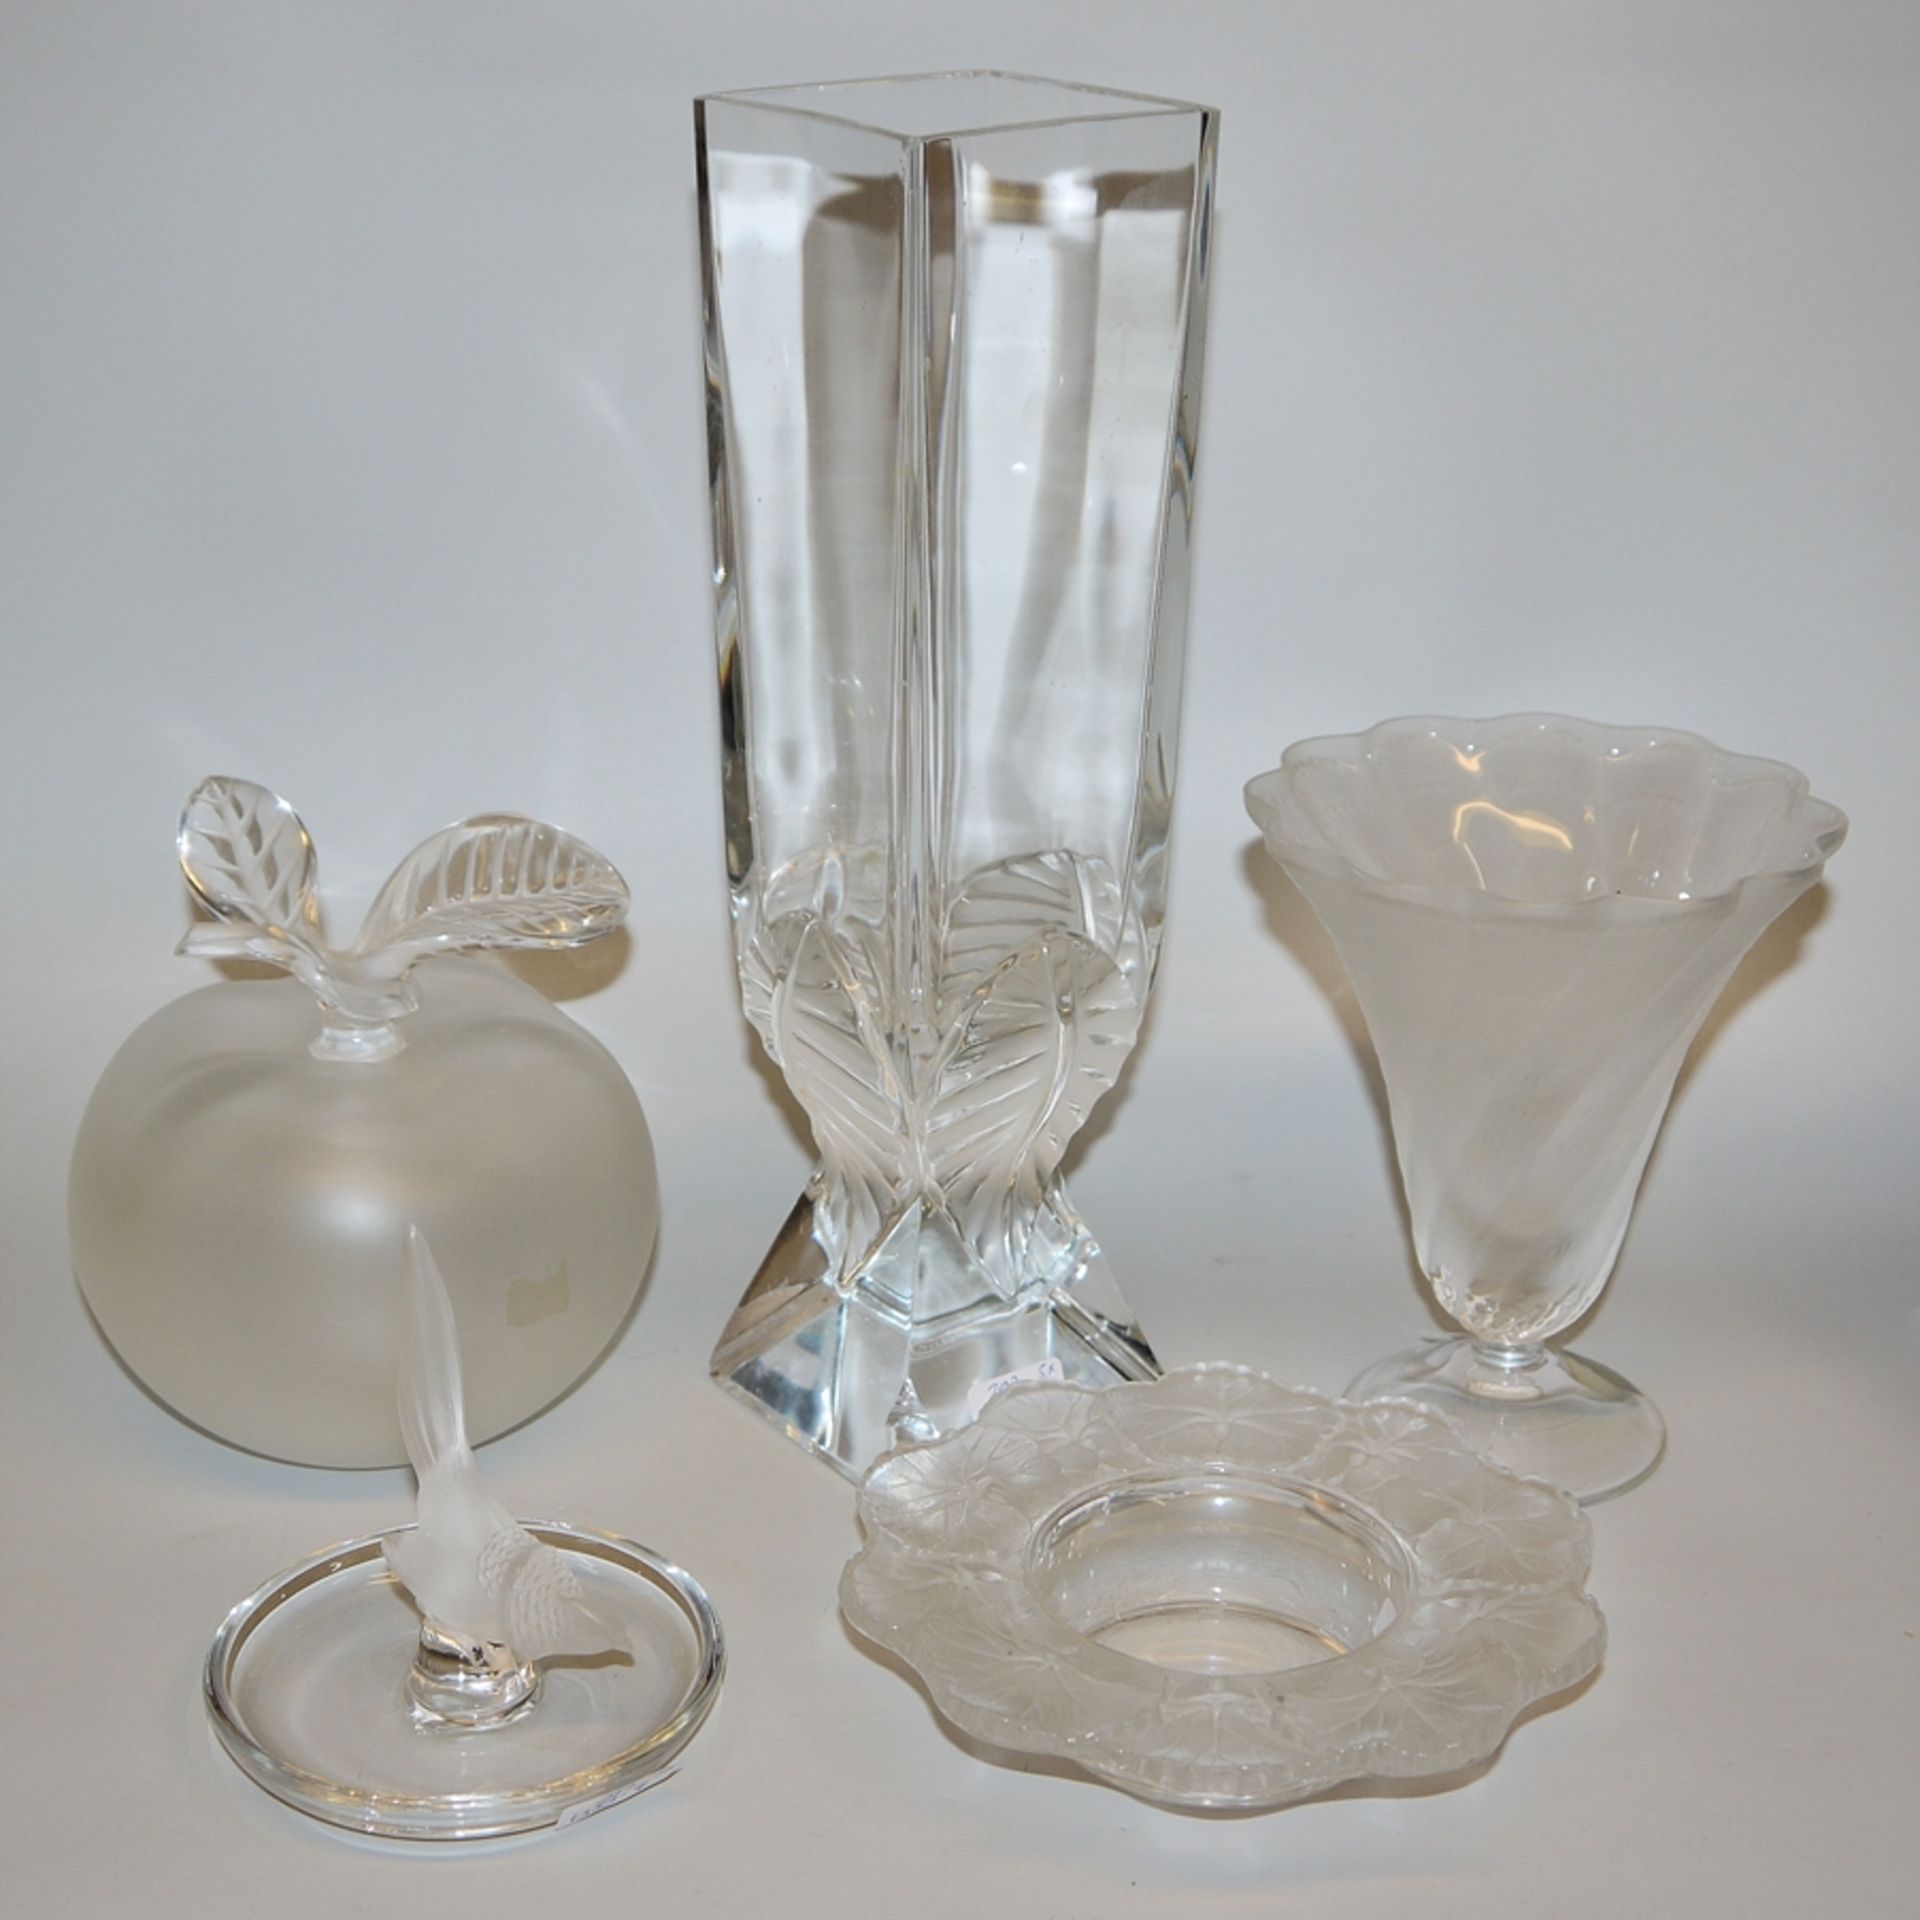 5 x Lalique glass from collection estate: "Fille d'Eve" flacon, "Lucie" and "Broceliande" vase, sma